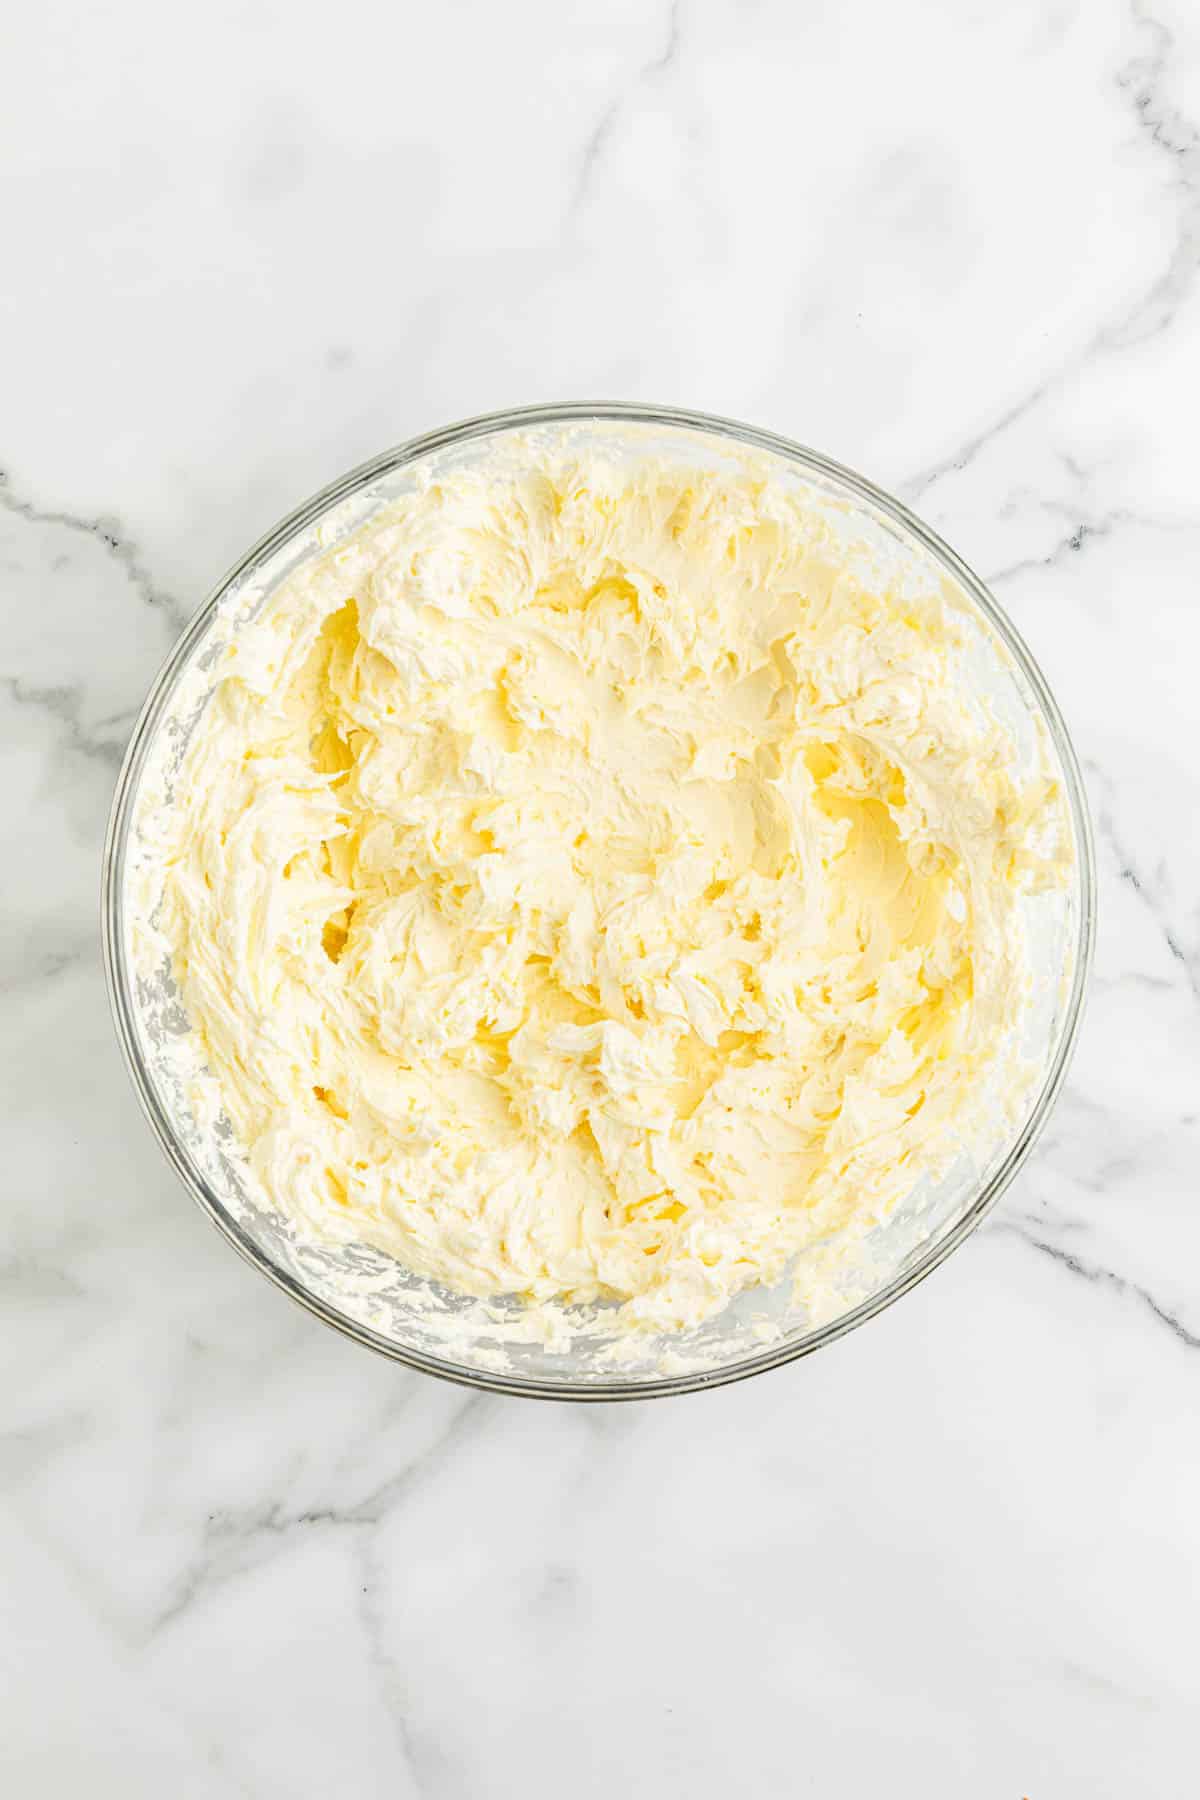 Whipped cream cheese in a glass bowl.